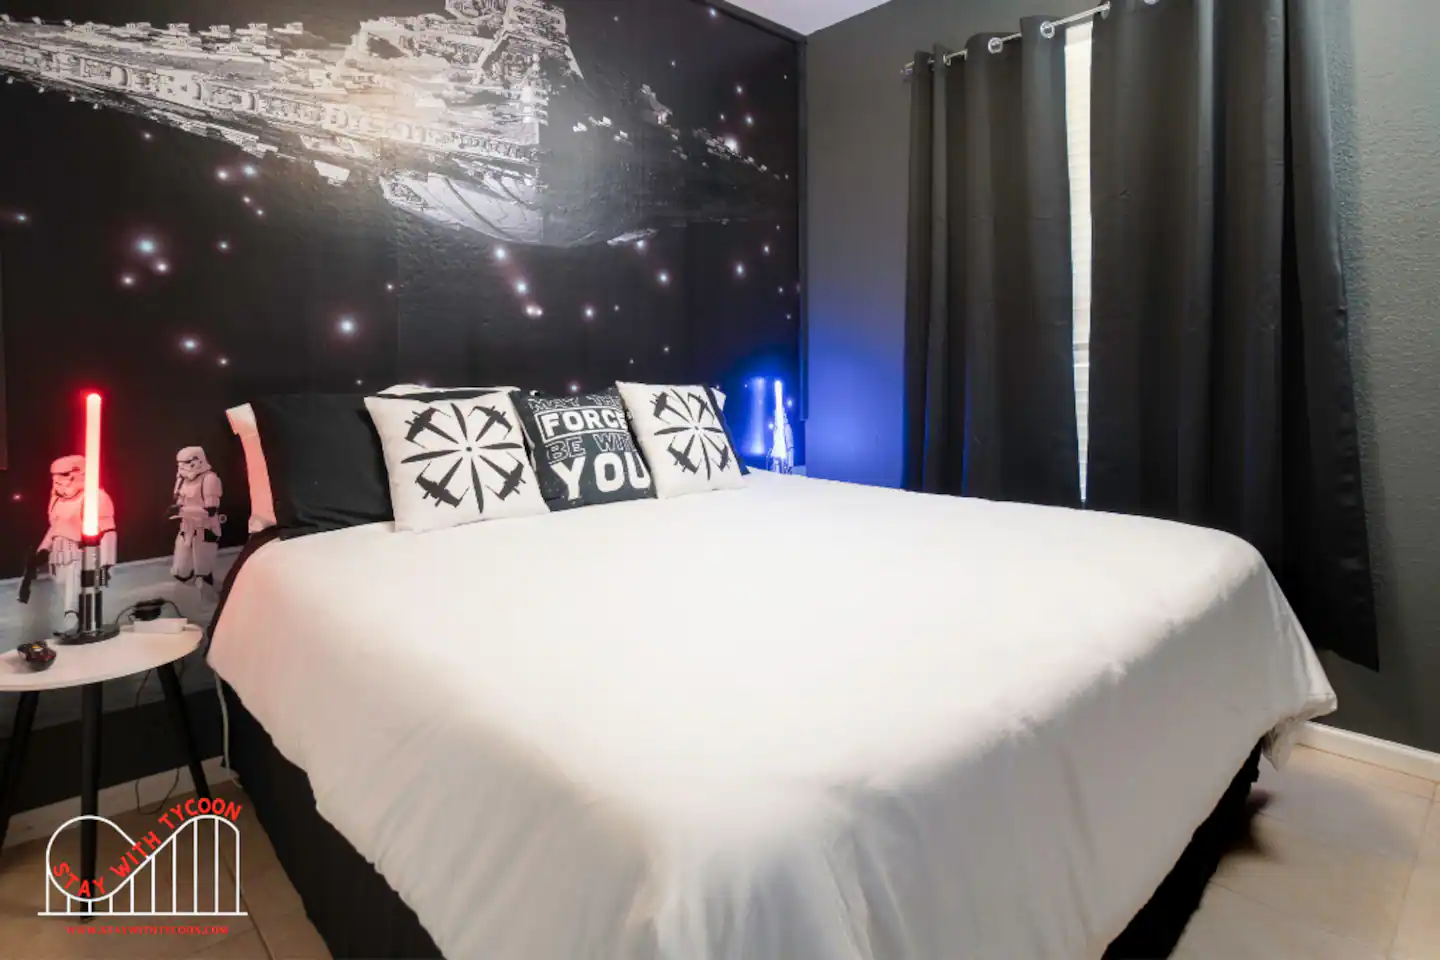 A king-sized bed in a Star Wars bedroom!

The Toy Story restroom is shared with the Harry Potter and Star Wars rooms!

Slides at the Community Pool

Living room with a Mickey Mouse motif!

Mickey Mouse Kitchen and Living Room in the Entryway!

Mickey Mouse Kitchen is fully stocked.